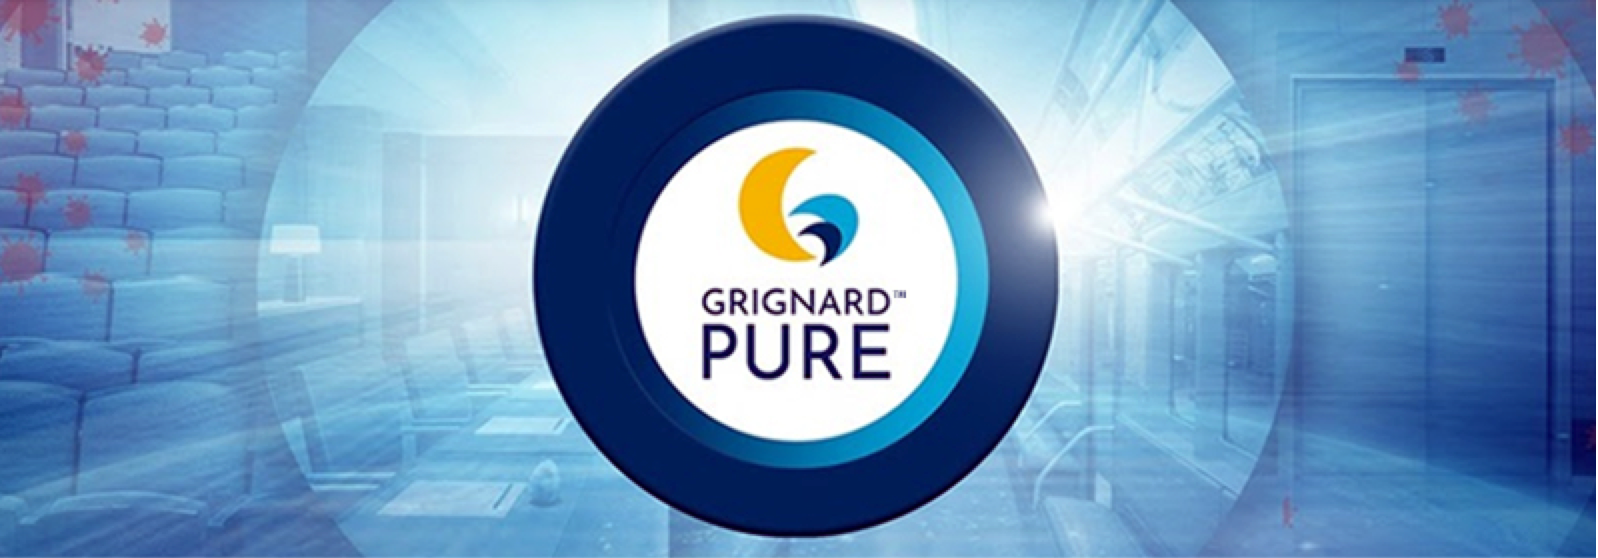 SS White Becomes Exclusive Distributor of Grignard Pure Antimicrobial Air Treatment